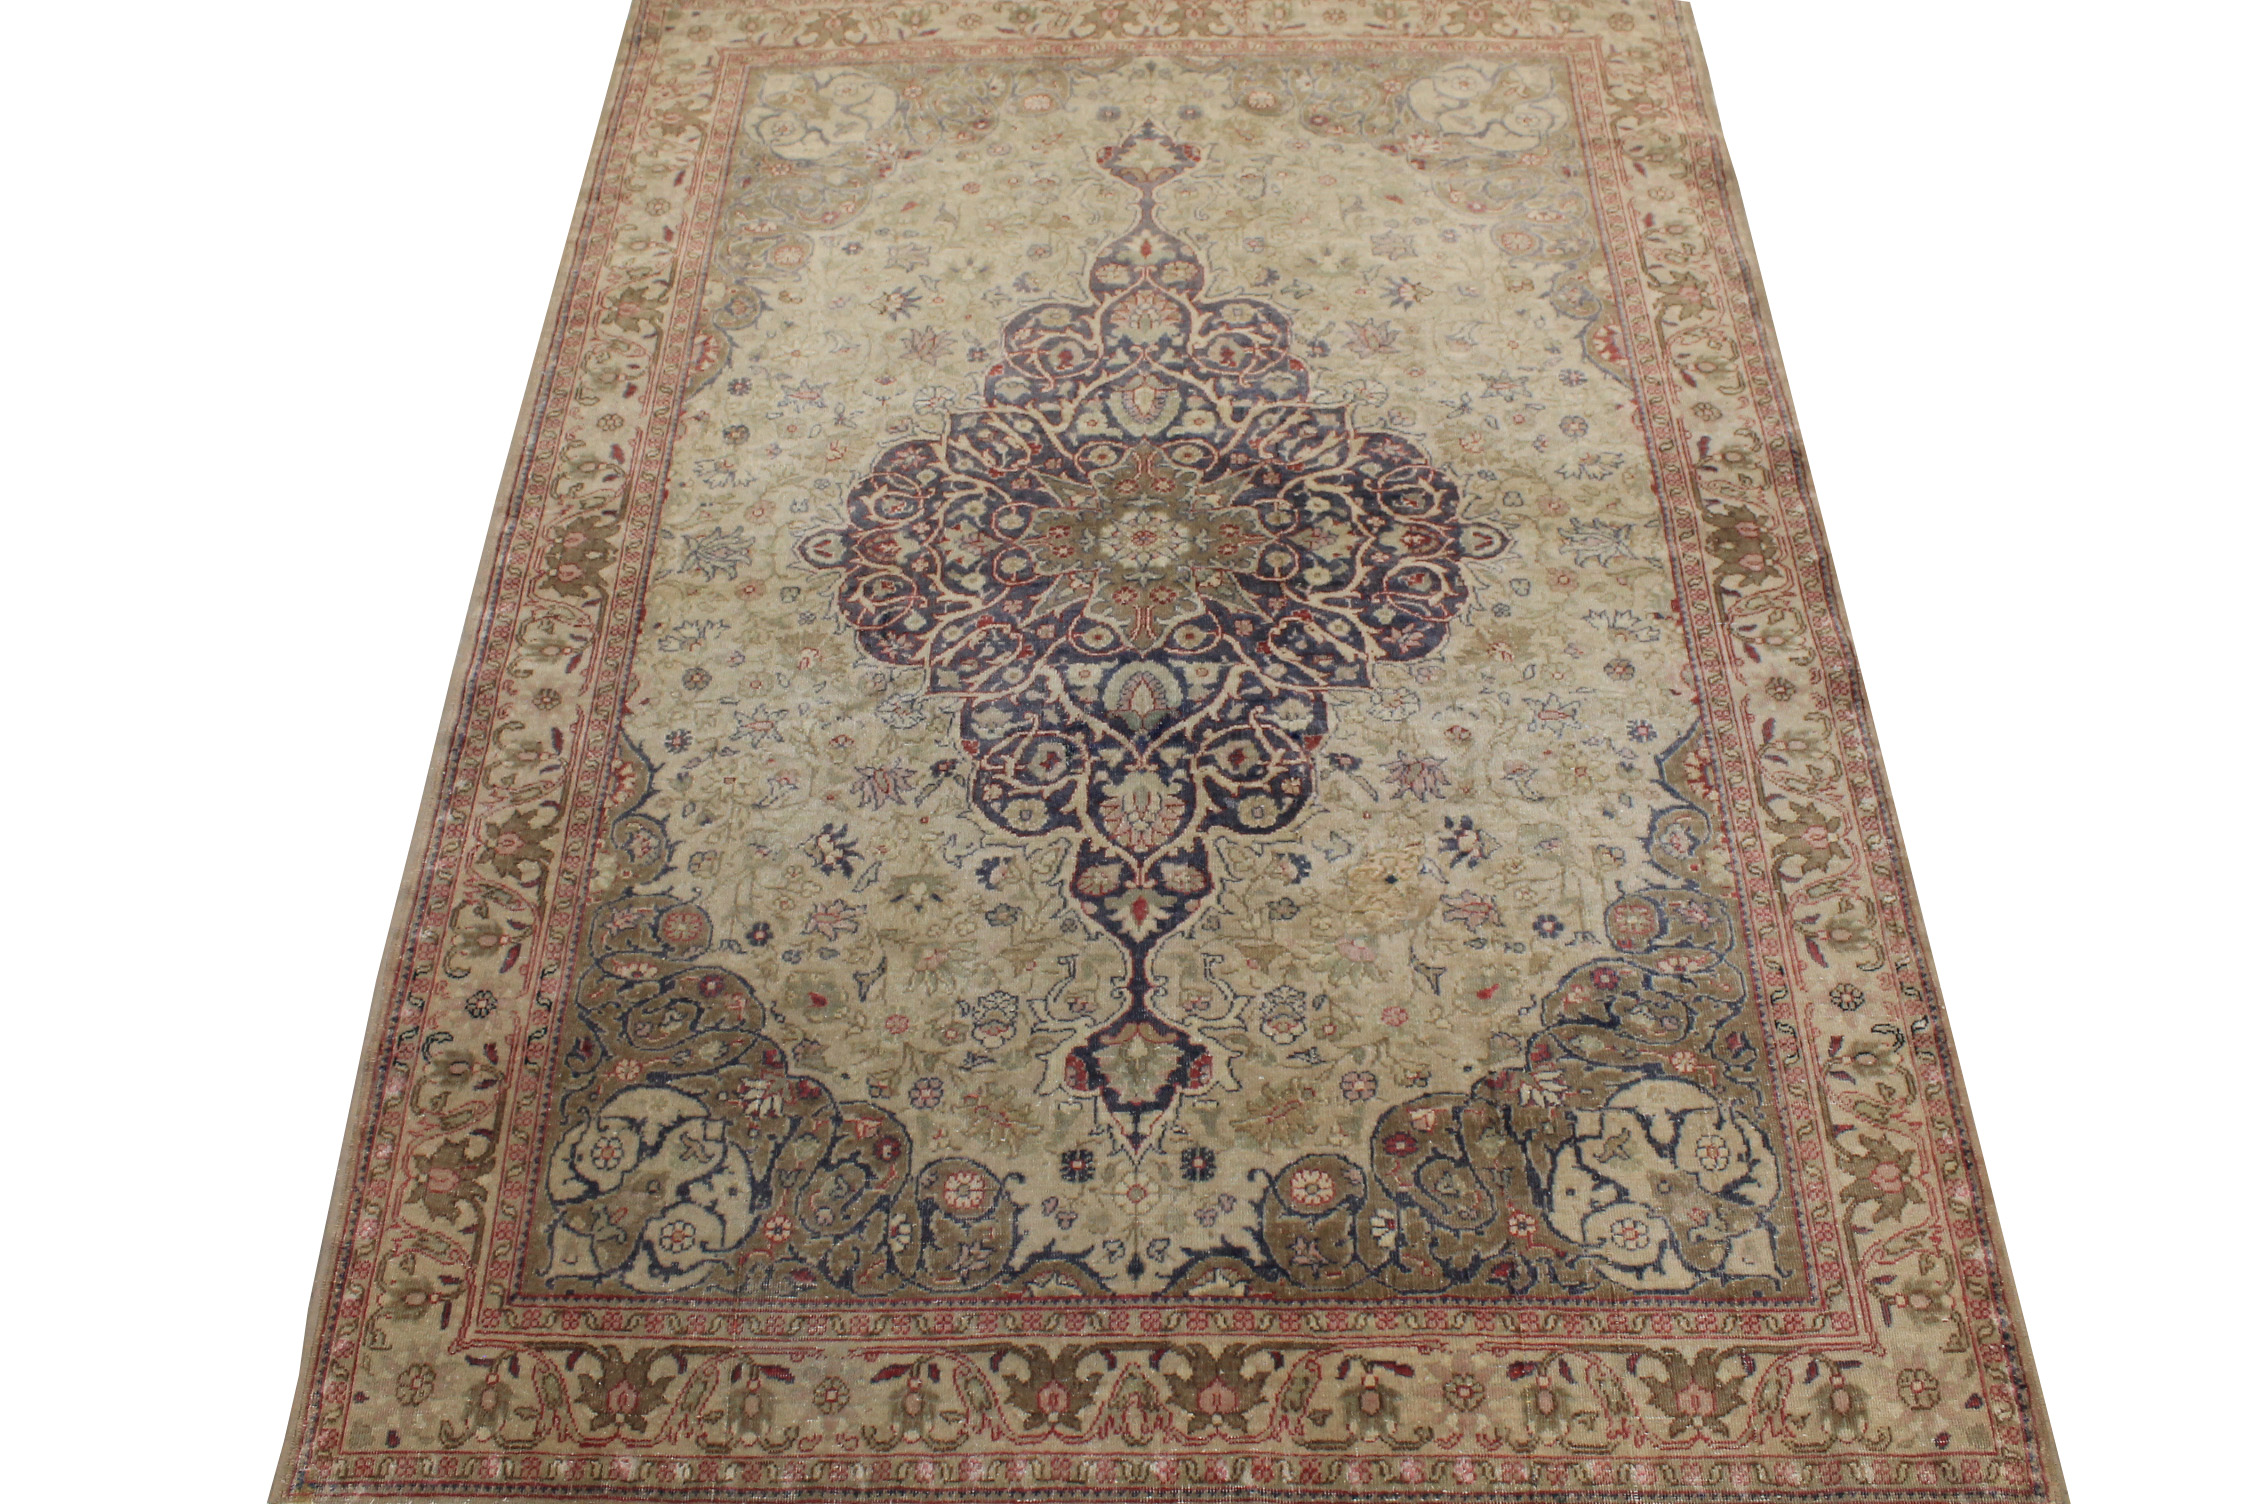 4x6 Vintage Hand Knotted Wool Area Rug - MR028237